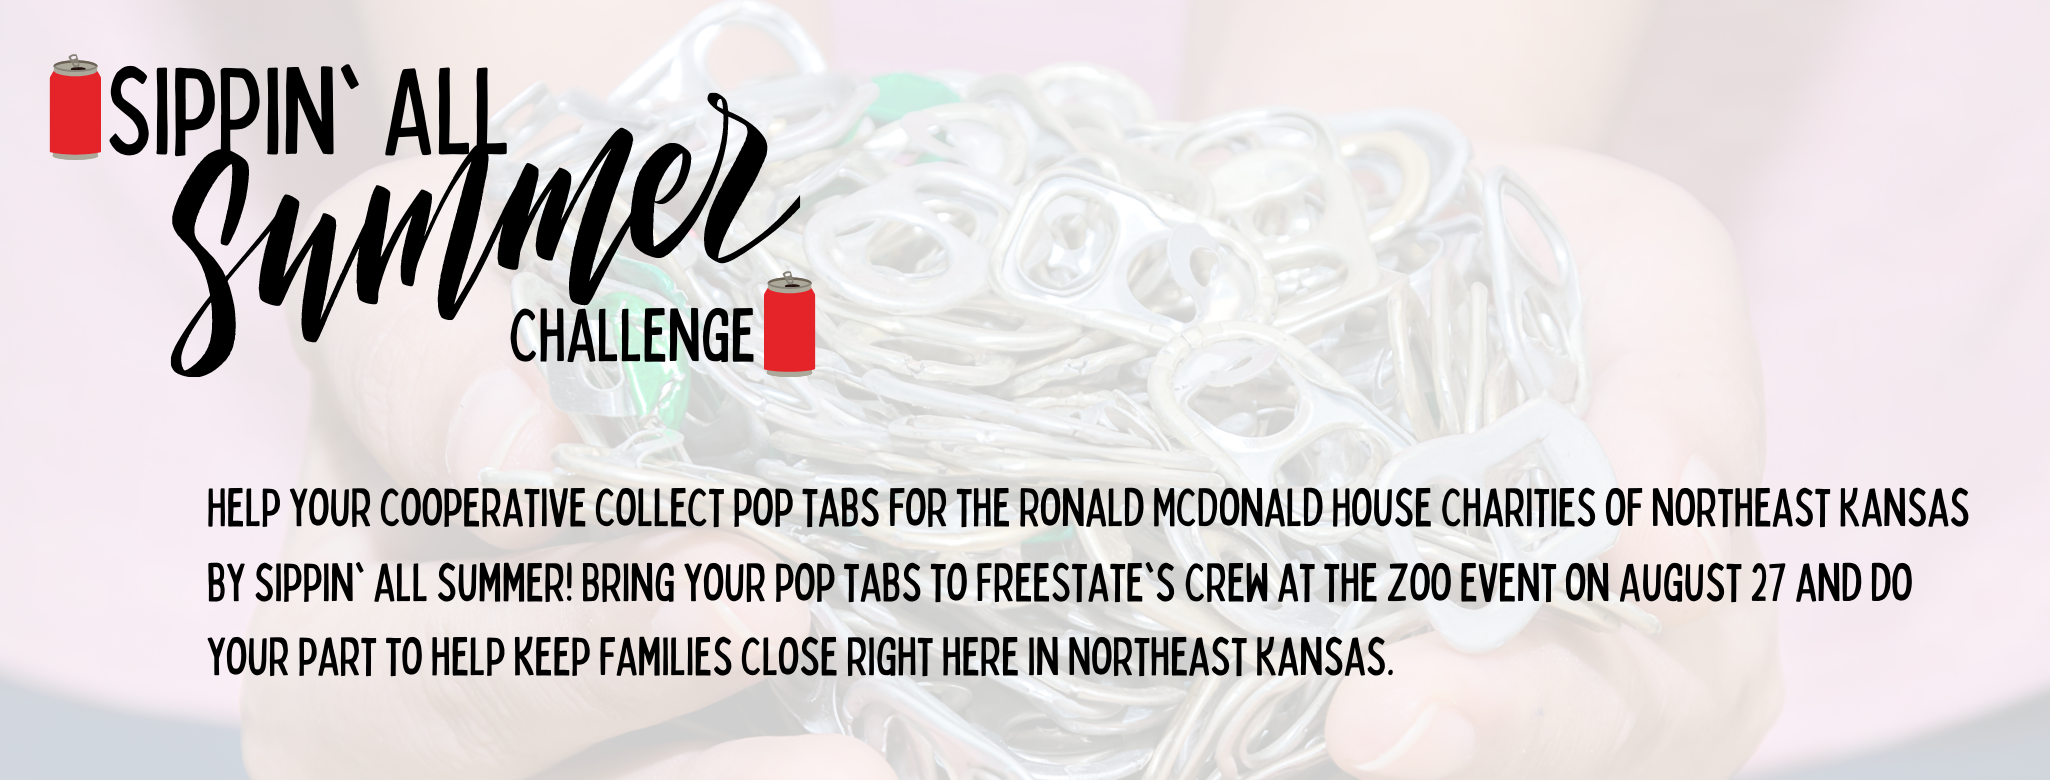 Join the challenge to collect tabs